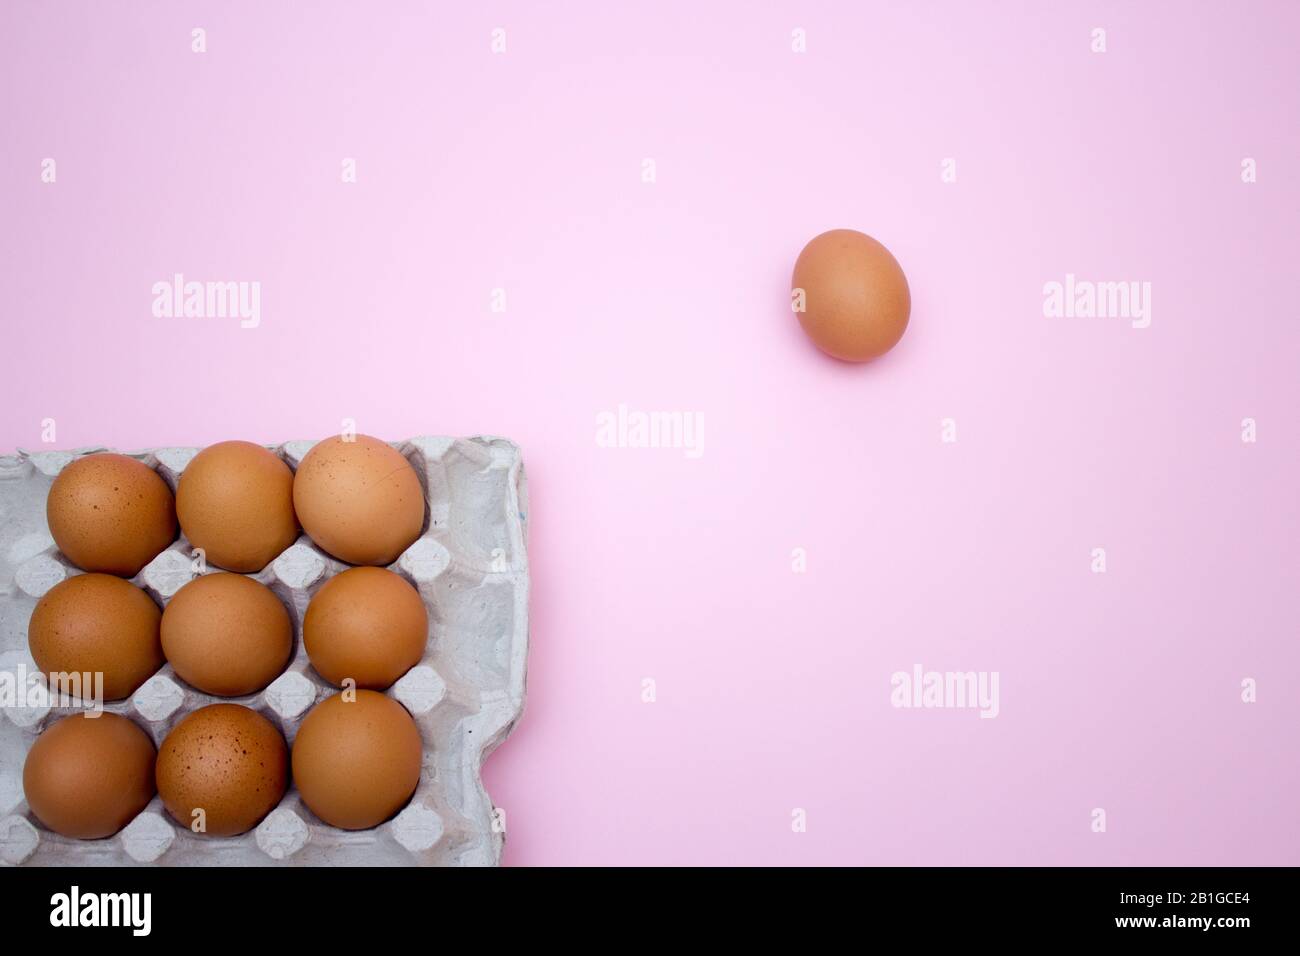 Egg, Eggs on a pink background. Eggs in a tray Stock Photo